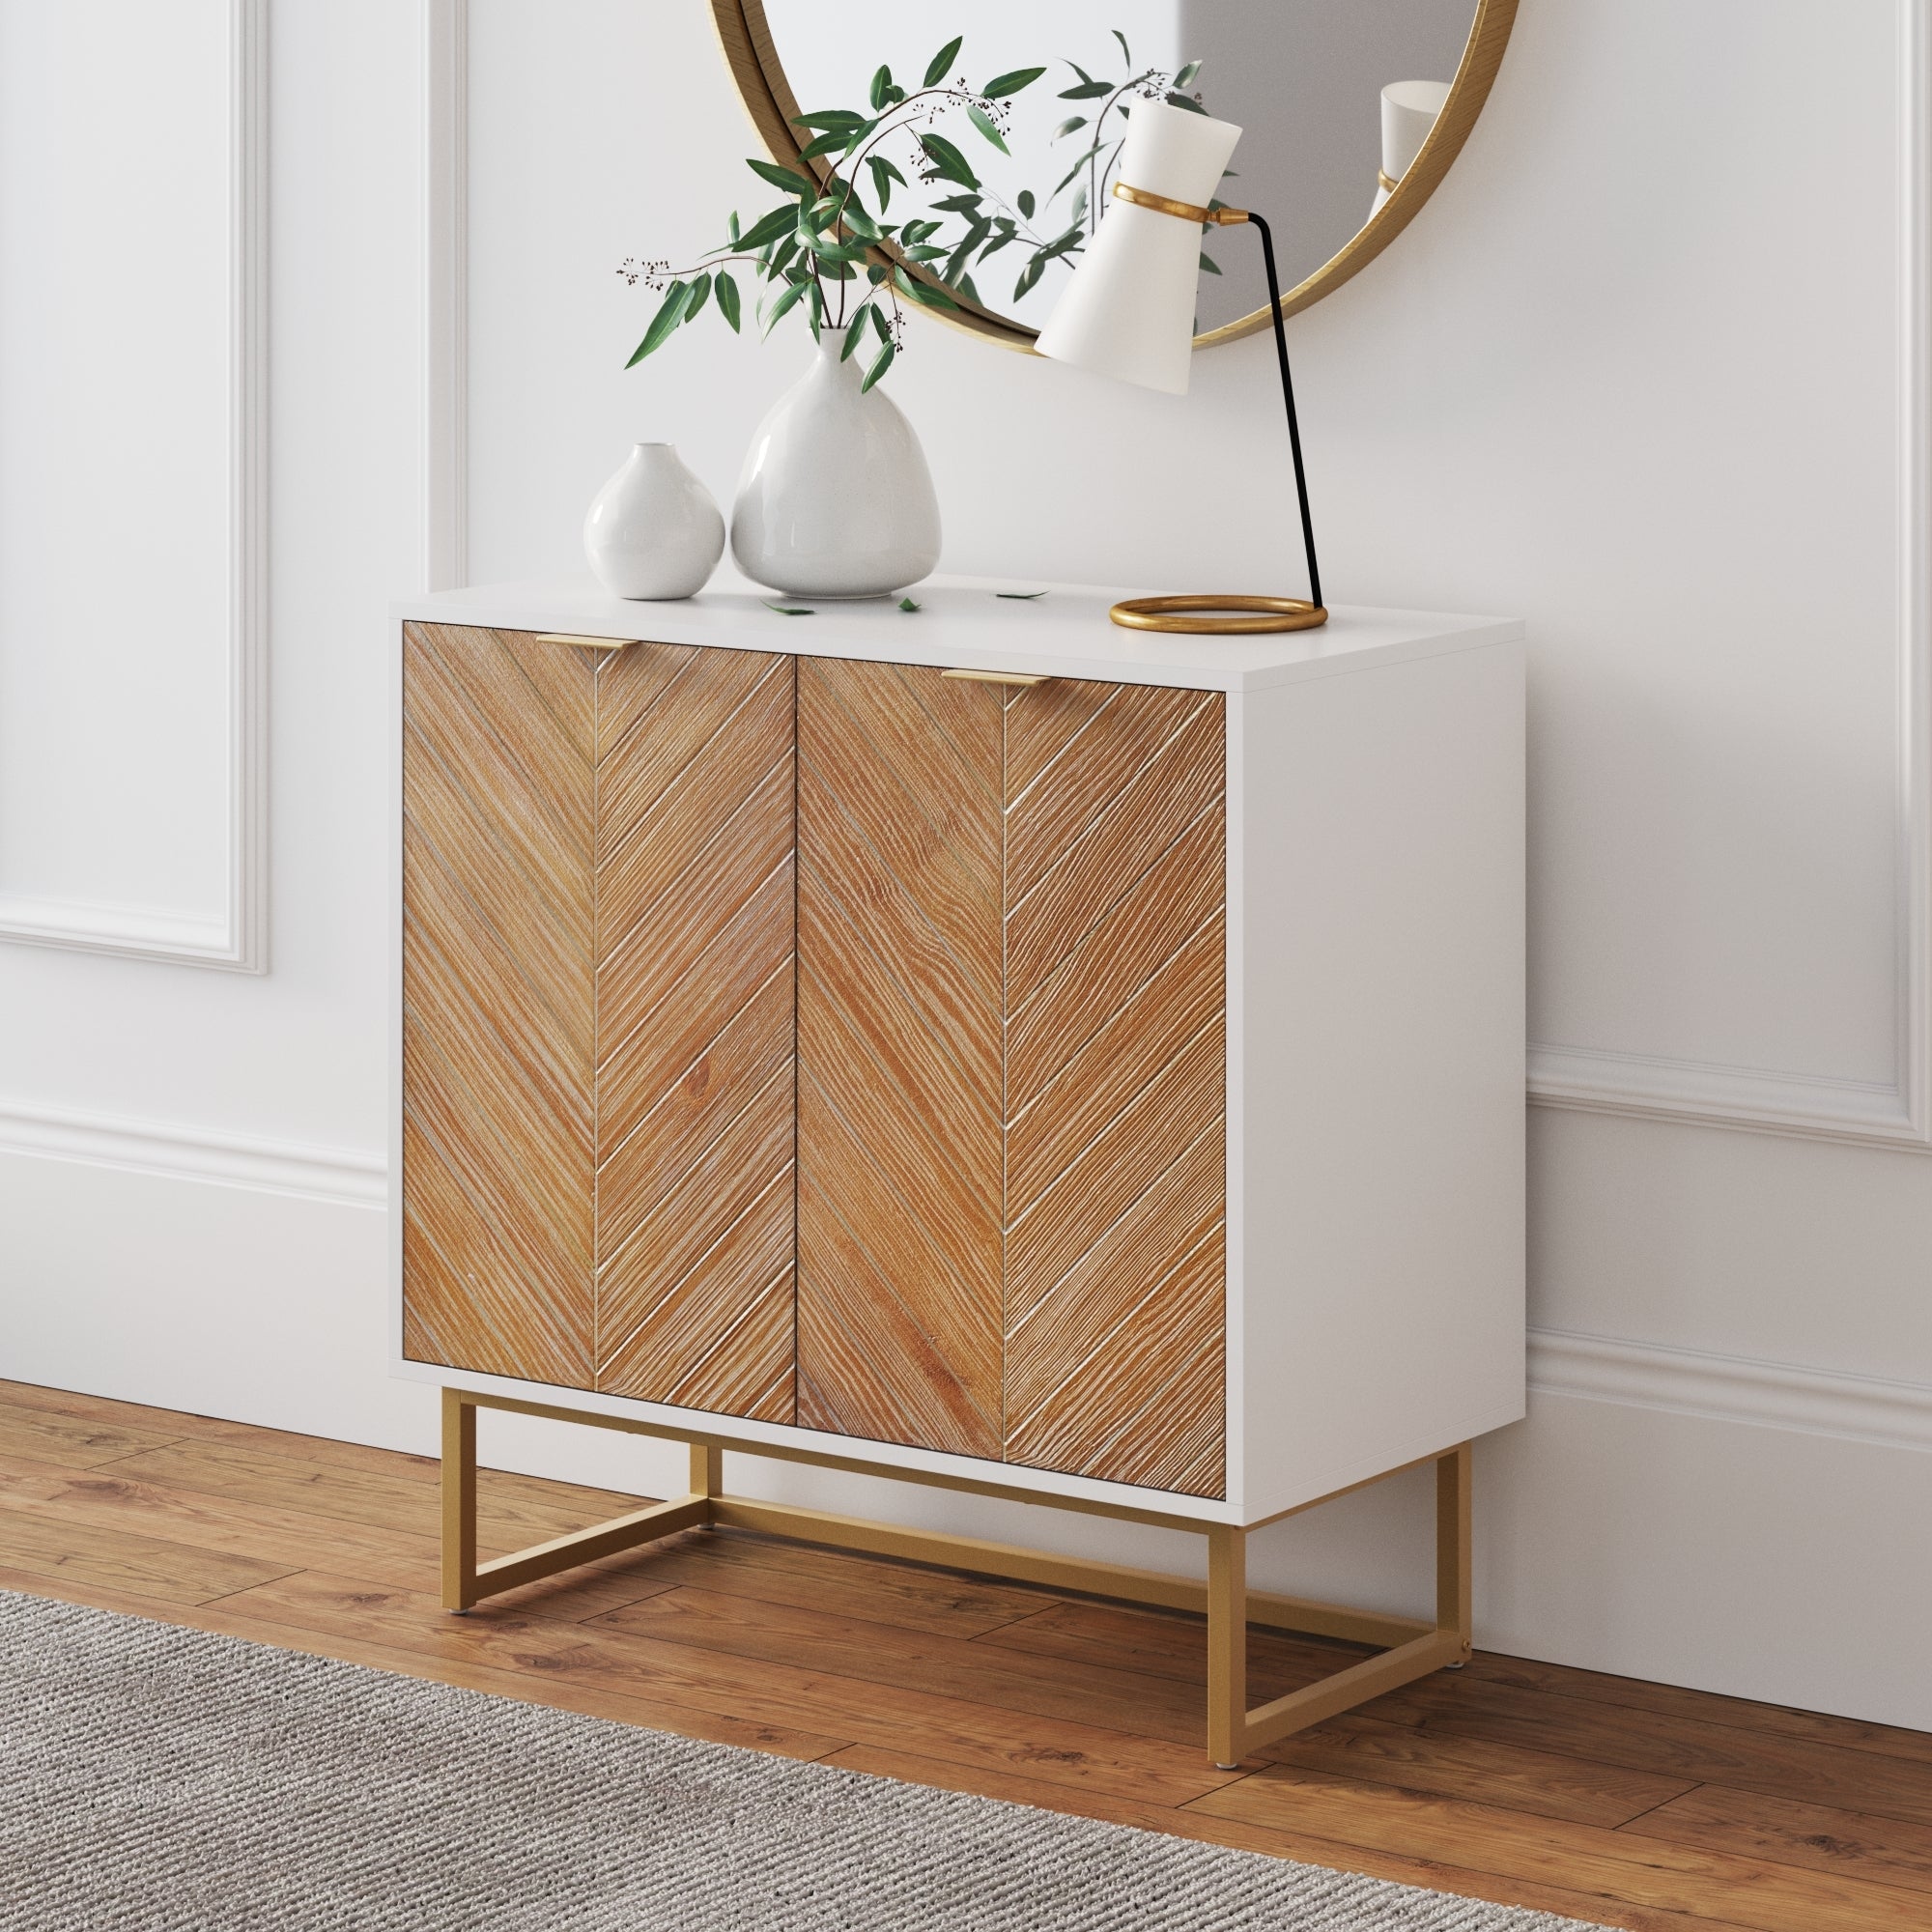 Nathan James Jasper 31 in. Warm Pine Modern Wood Sideboard Accent Storage  Cabinet with Doors, for Kitchen, Living or Dining Room 71801 - The Home  Depot